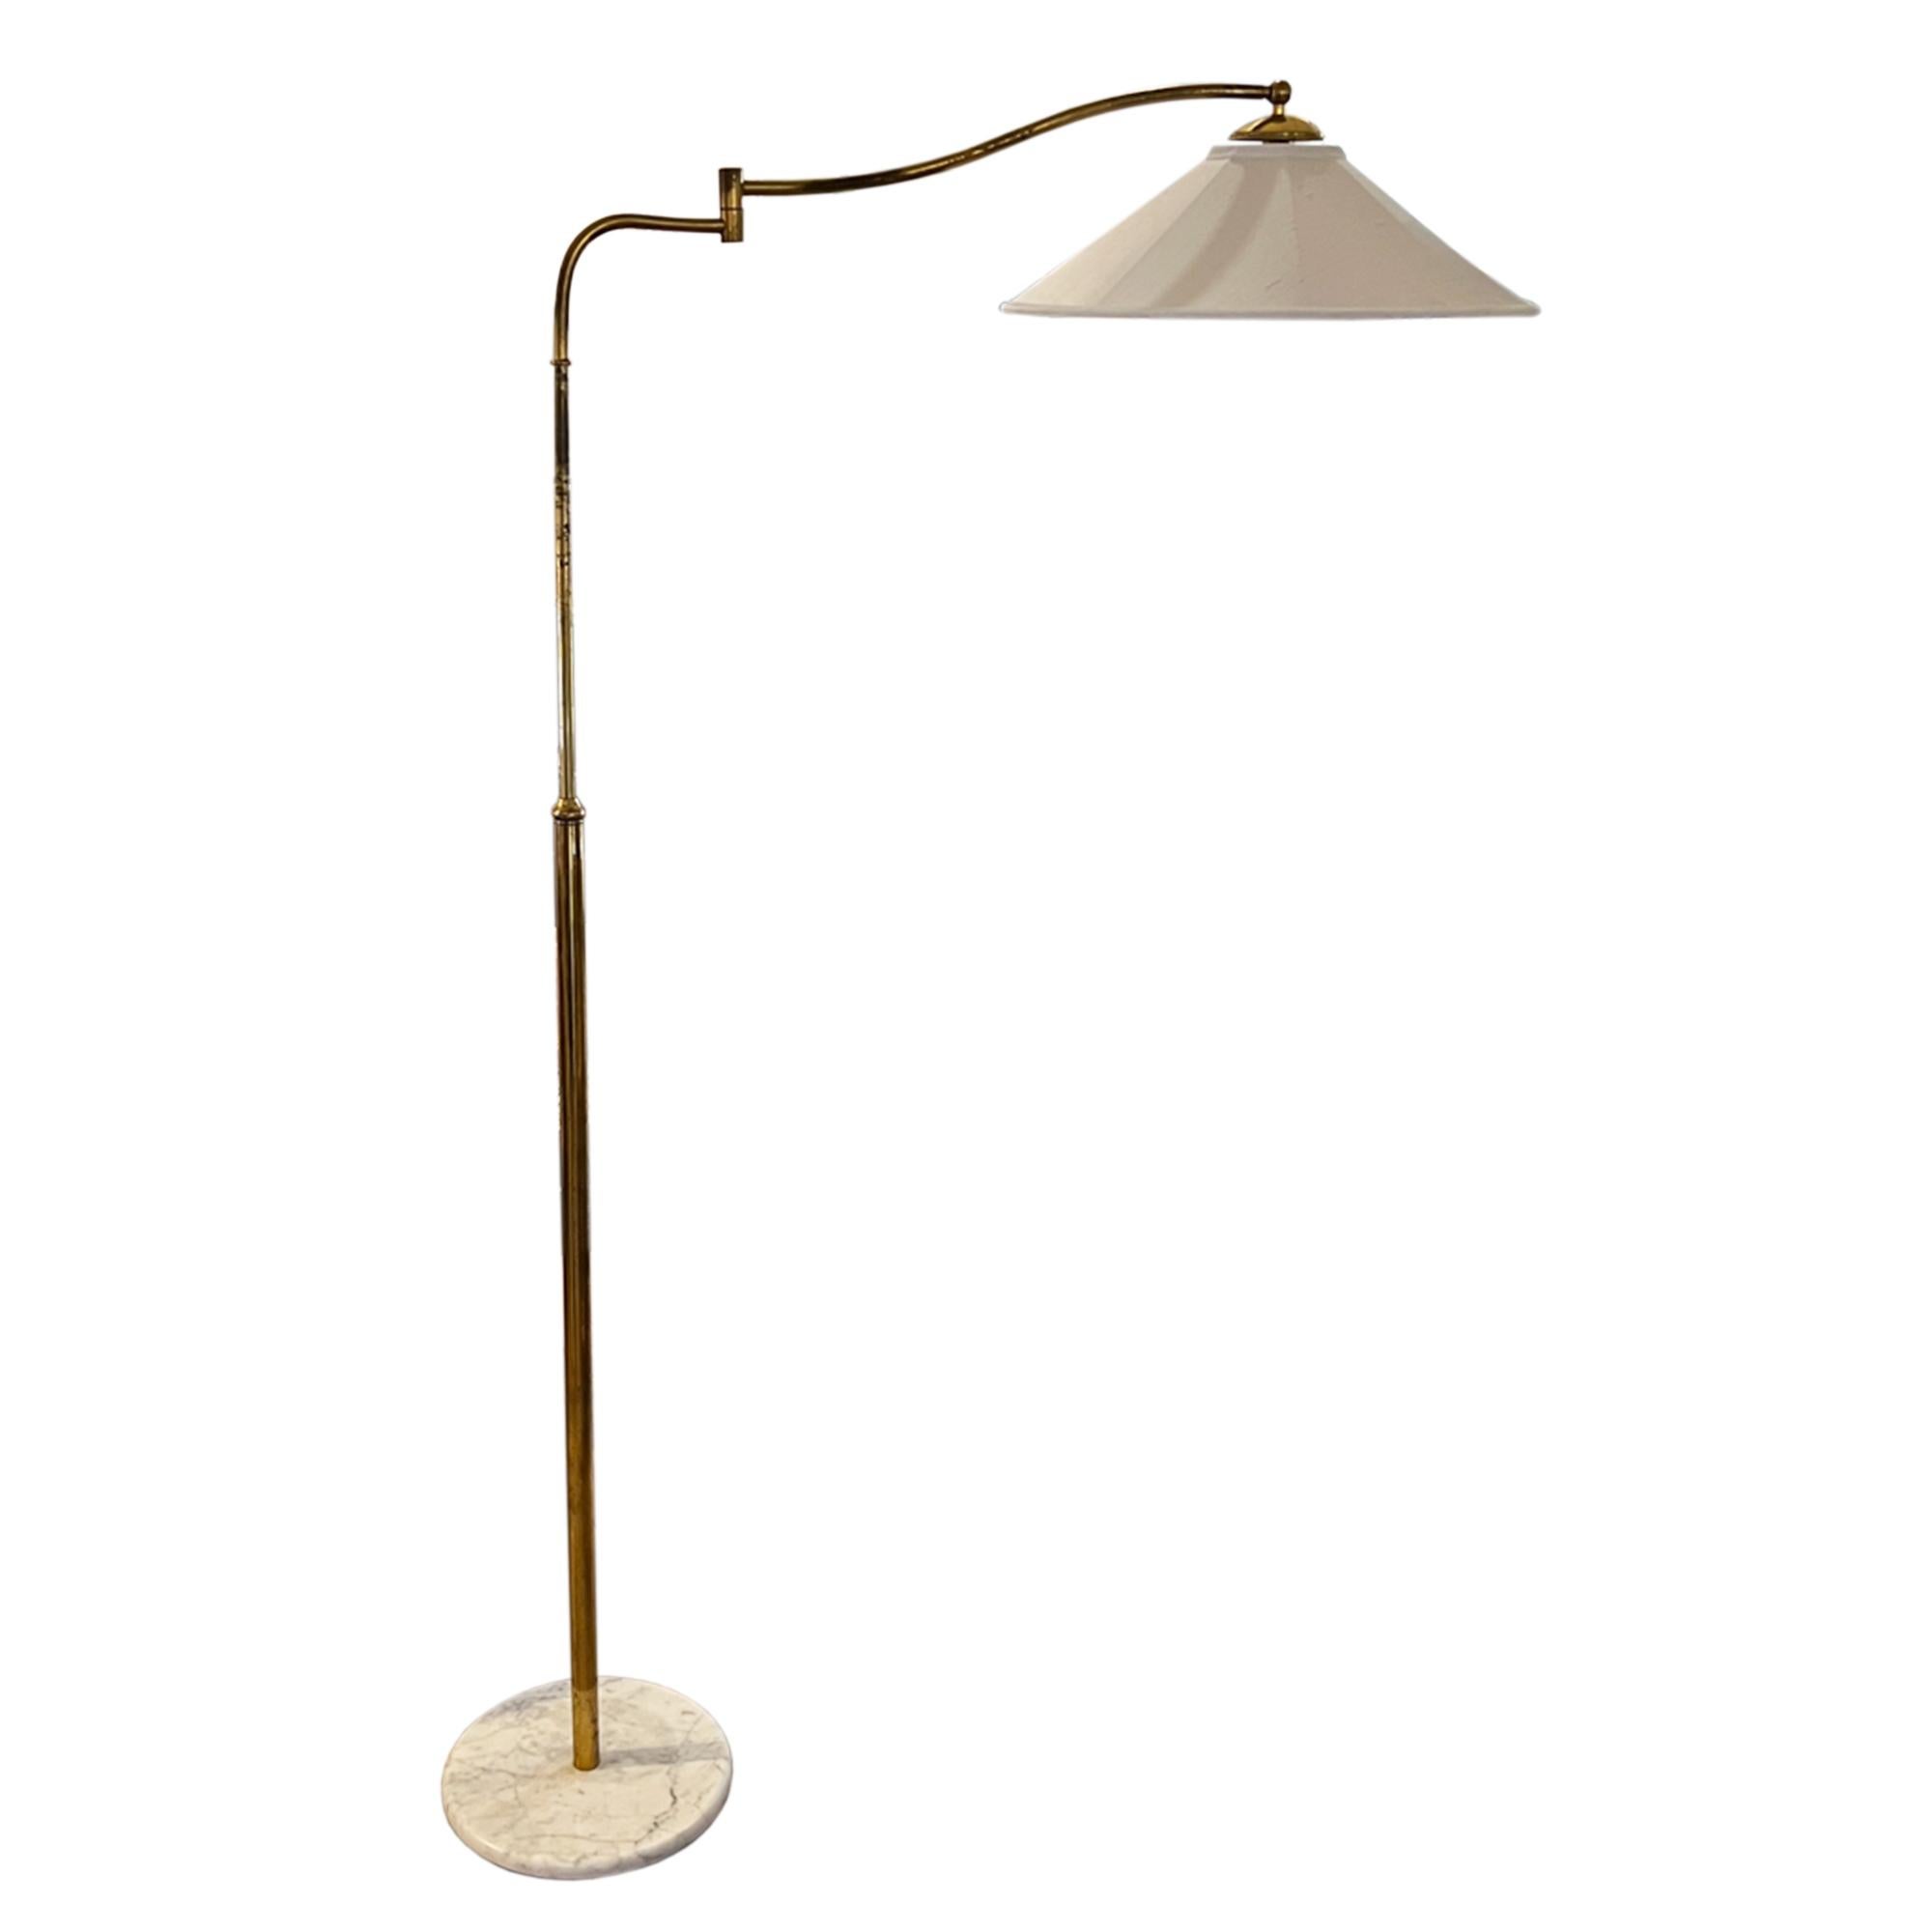 This is a classic Italian floor lamp, with a moving arm. 

Made from brass with a beautiful white / grey marble base. 

Fully adjustable, making this lamp practical as well as decorative. Max. height is 185cm to the elbow and this can be reduced